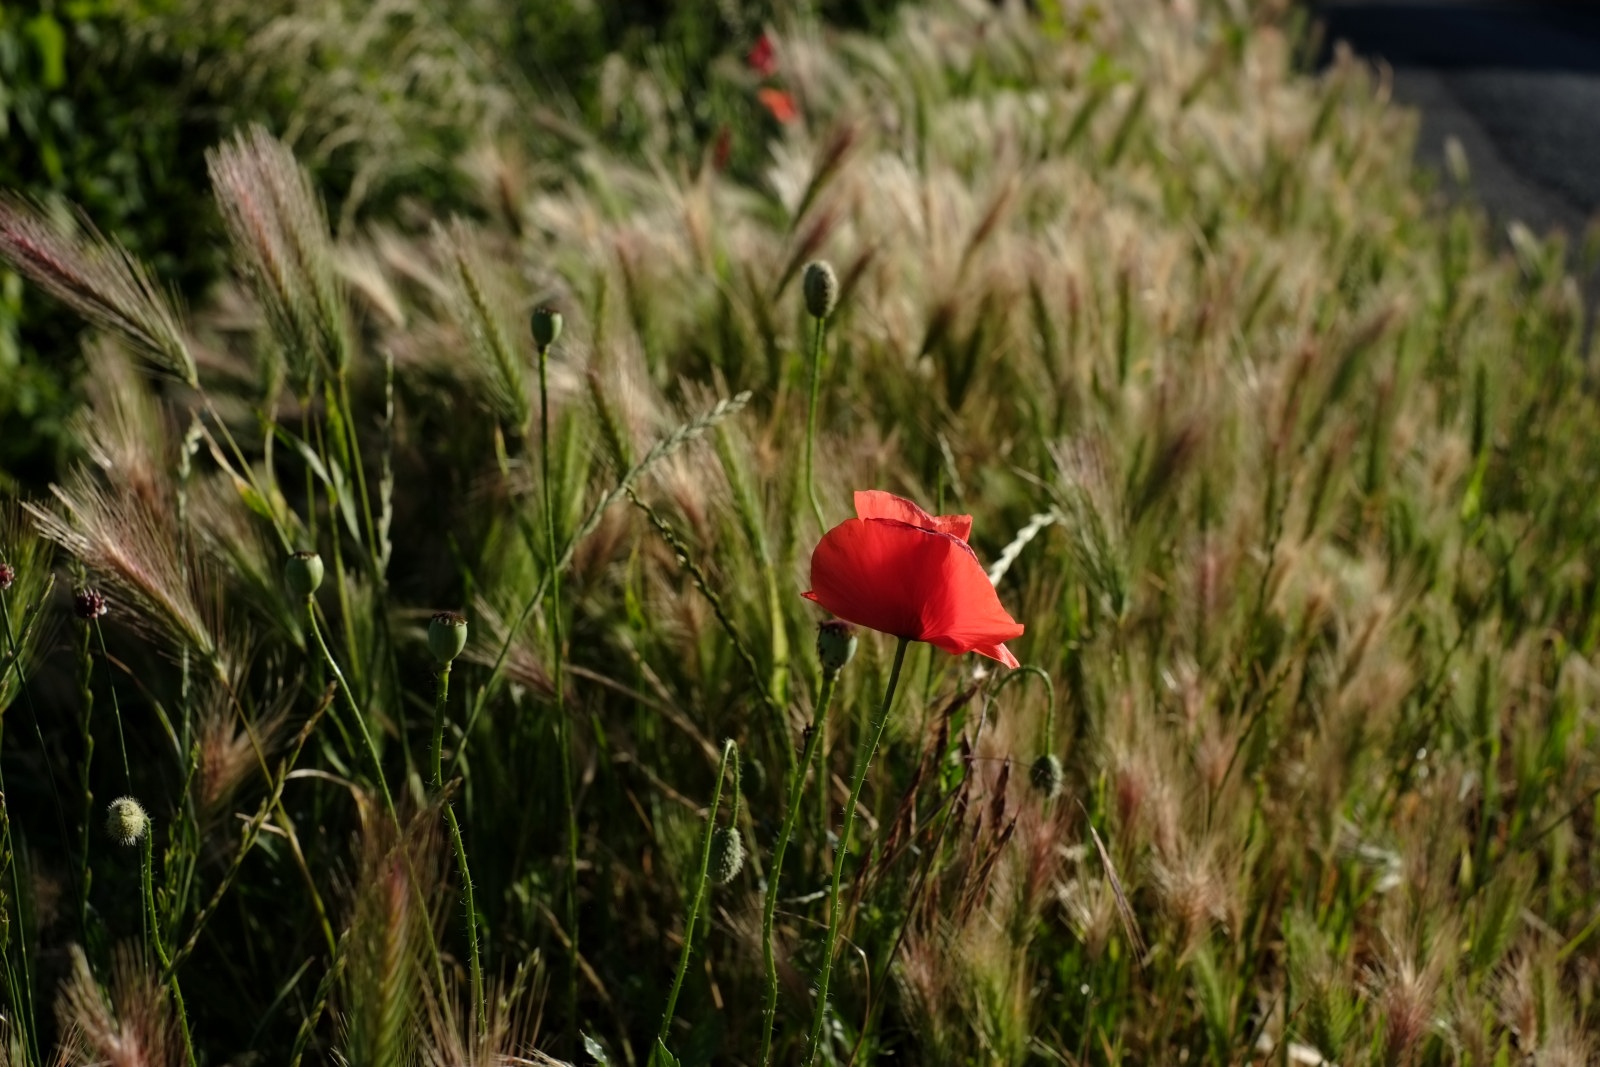 A wild roadside poppy and field of grain. Photography by Kent Johnson.